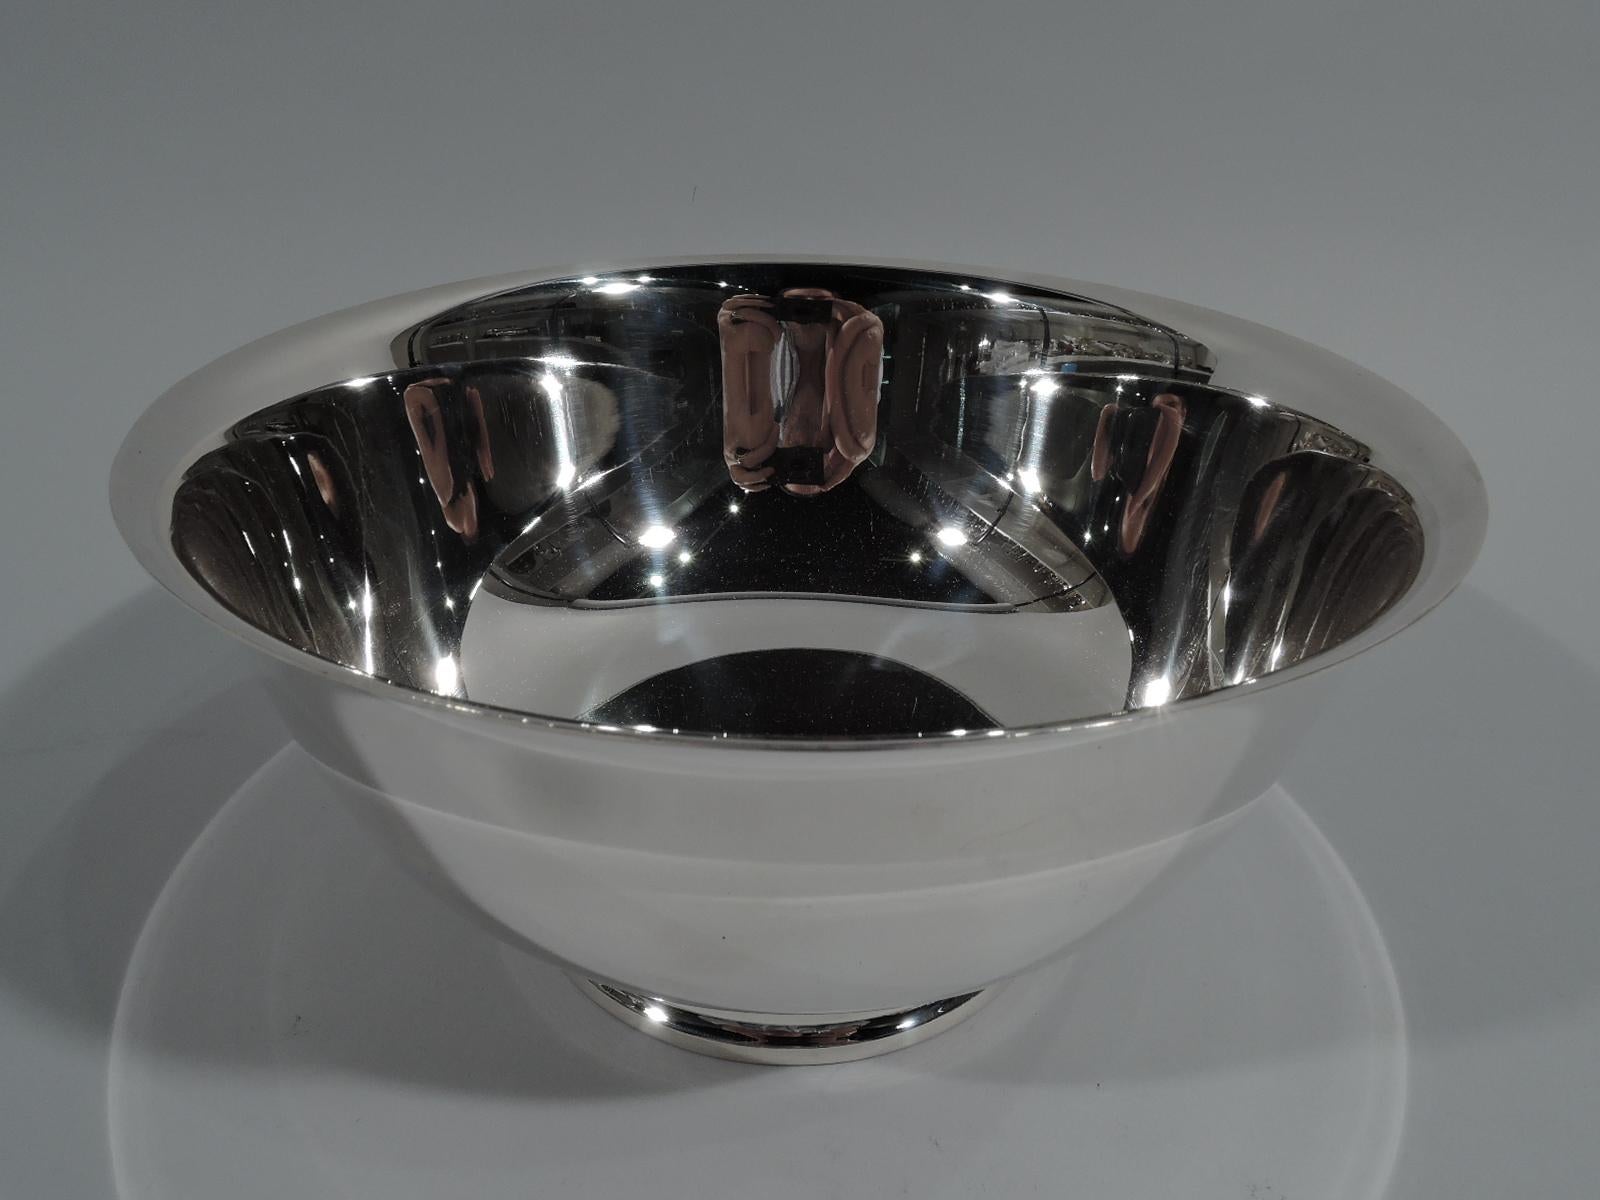 Traditional sterling silver Revere bowl. Made by International in Meriden, Conn. Classic form with tapering sides with curved bottom, flared rim, and stepped foot. Fully marked including phrase “Paul Revere / reproduction” and no. D261. Heavy